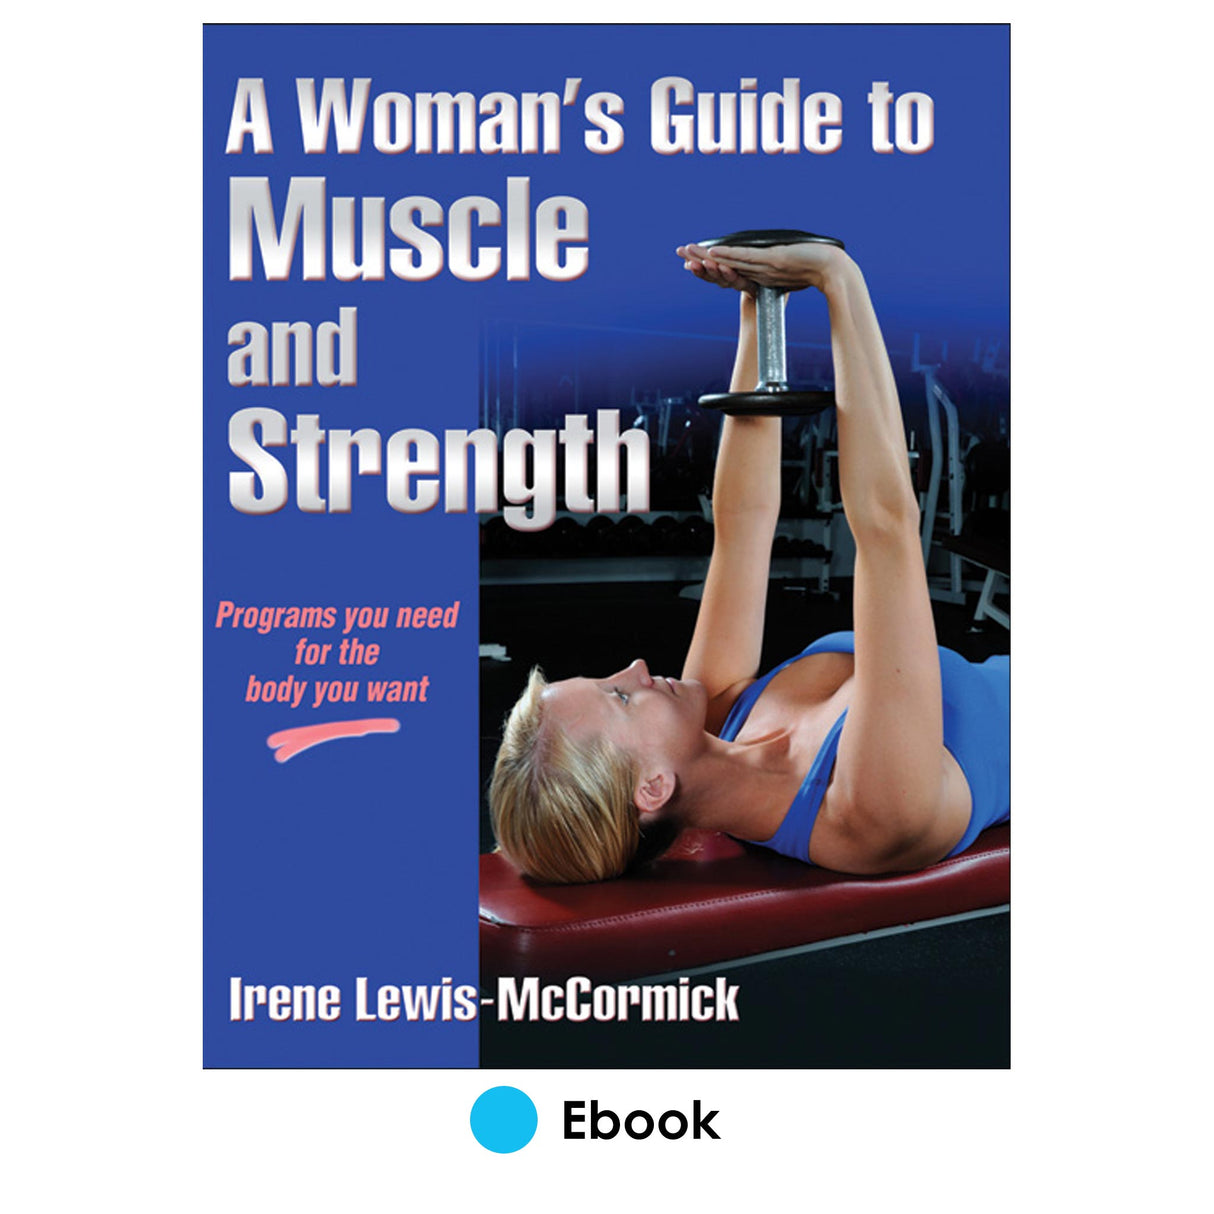 Woman's Guide to Muscle and Strength PDF, A